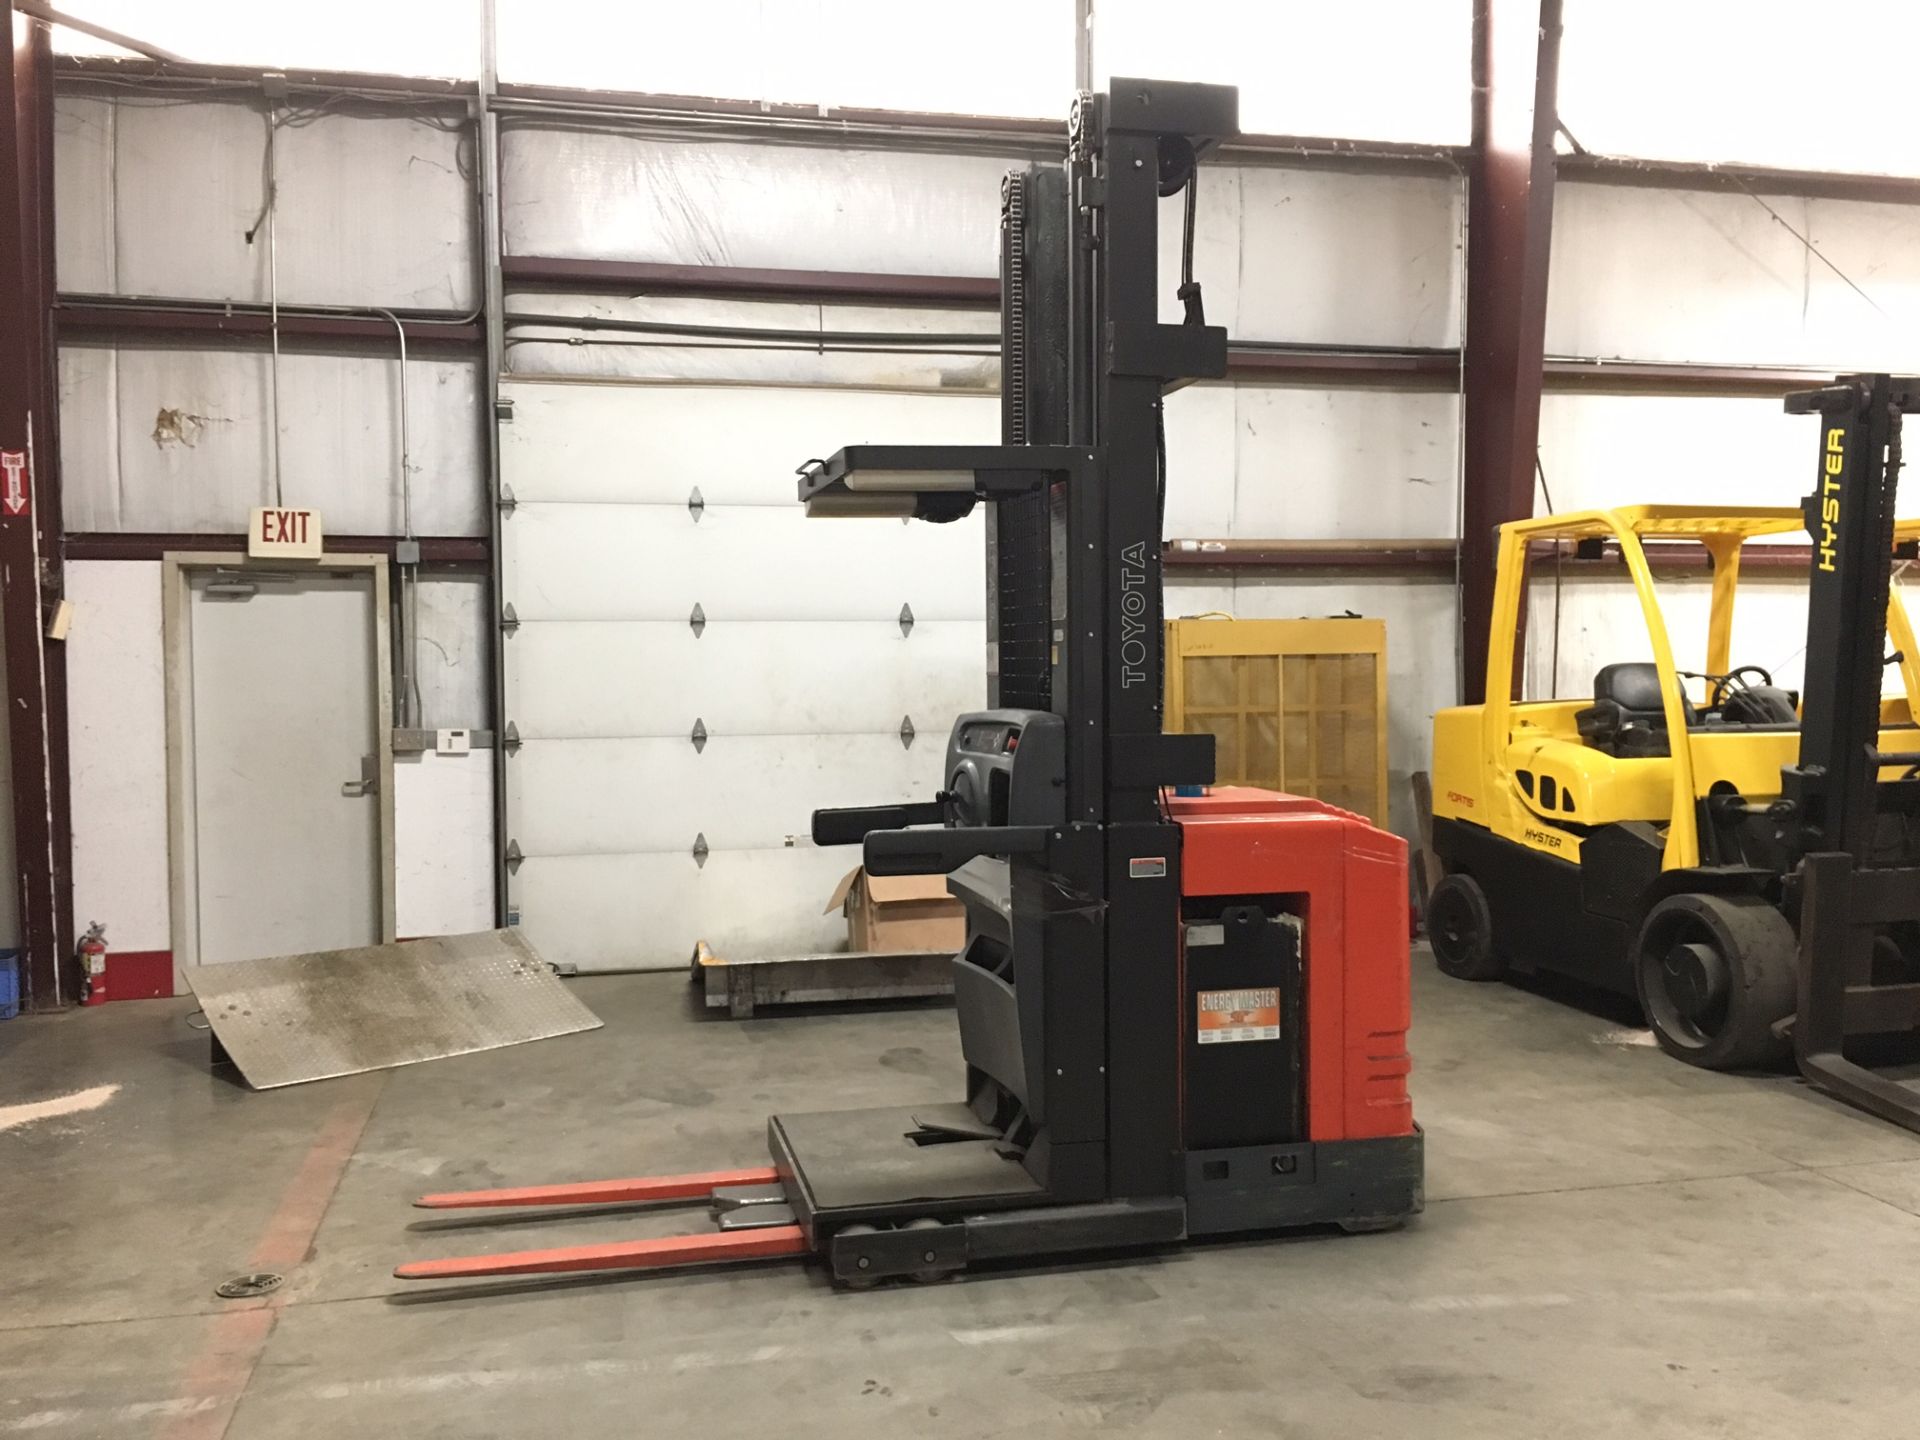 2011 TOYOTA 3,000 LB ORDER PICKER, MOD: 6BPU15, WITH 24-VOLT BATTERY, 300" RAISED, 1,231 DRIVE HOURS